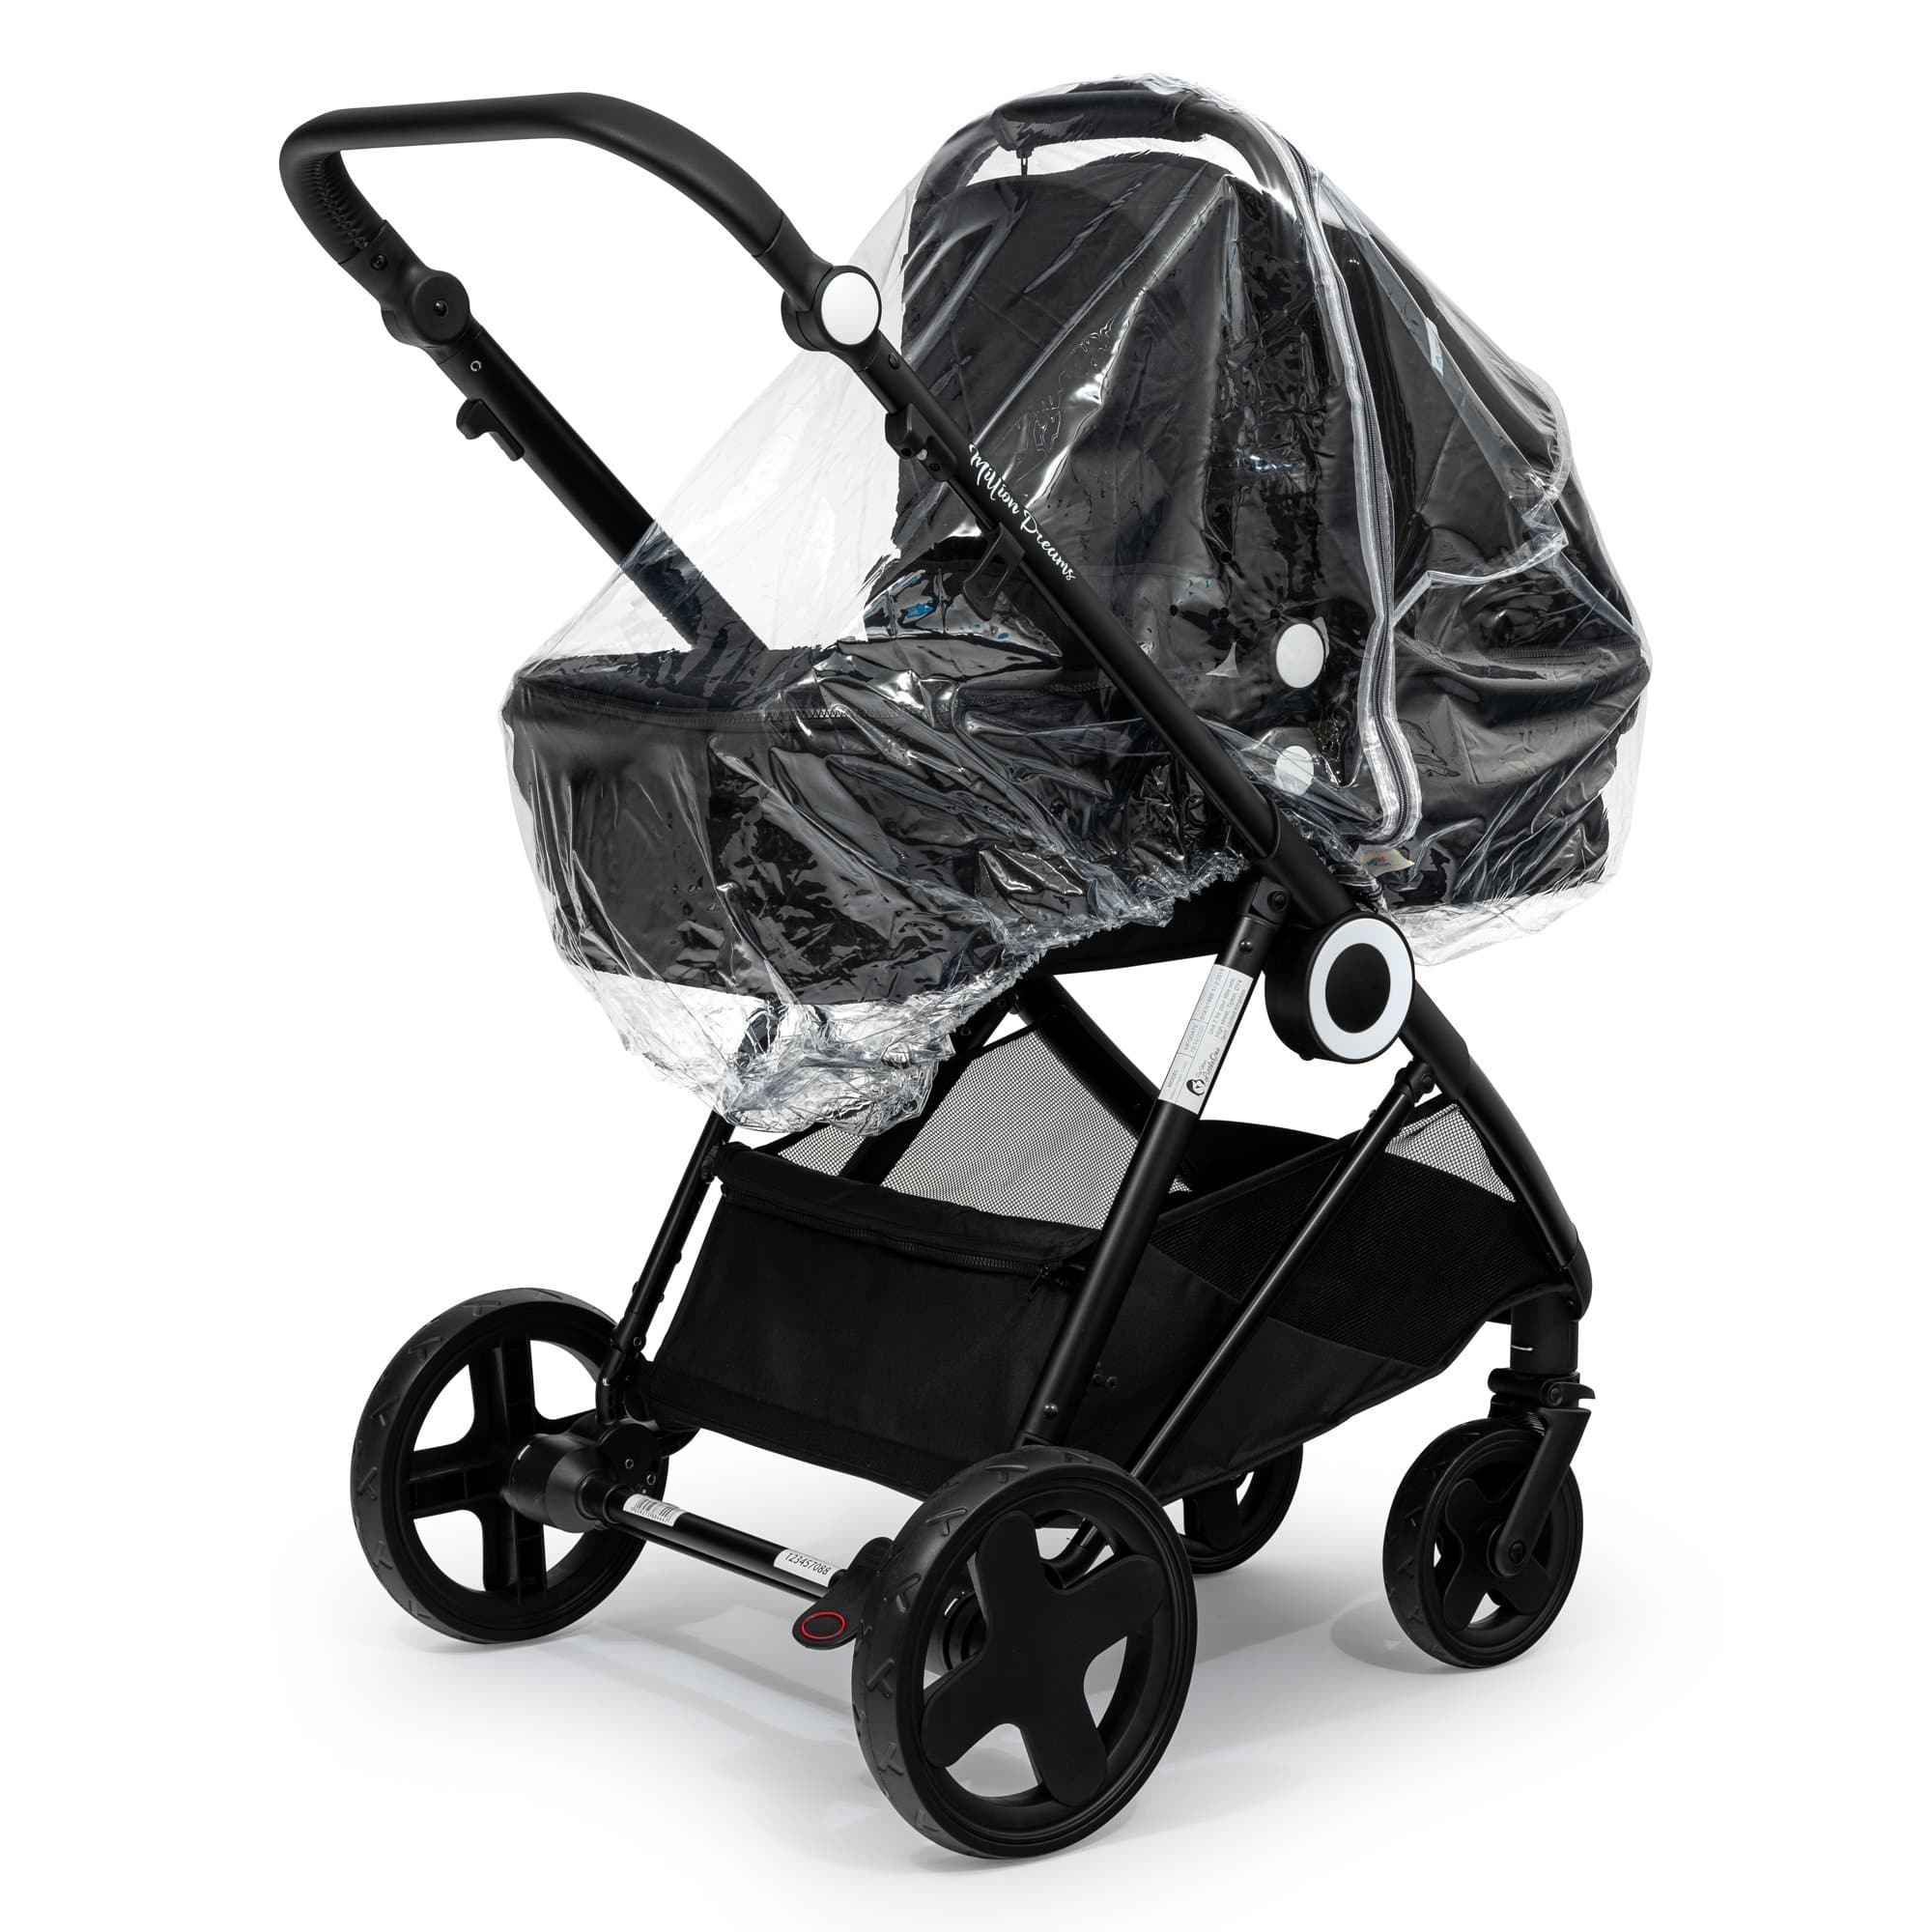 2 in 1 Rain Cover Compatible with Petite Star - Fits All Models - For Your Little One